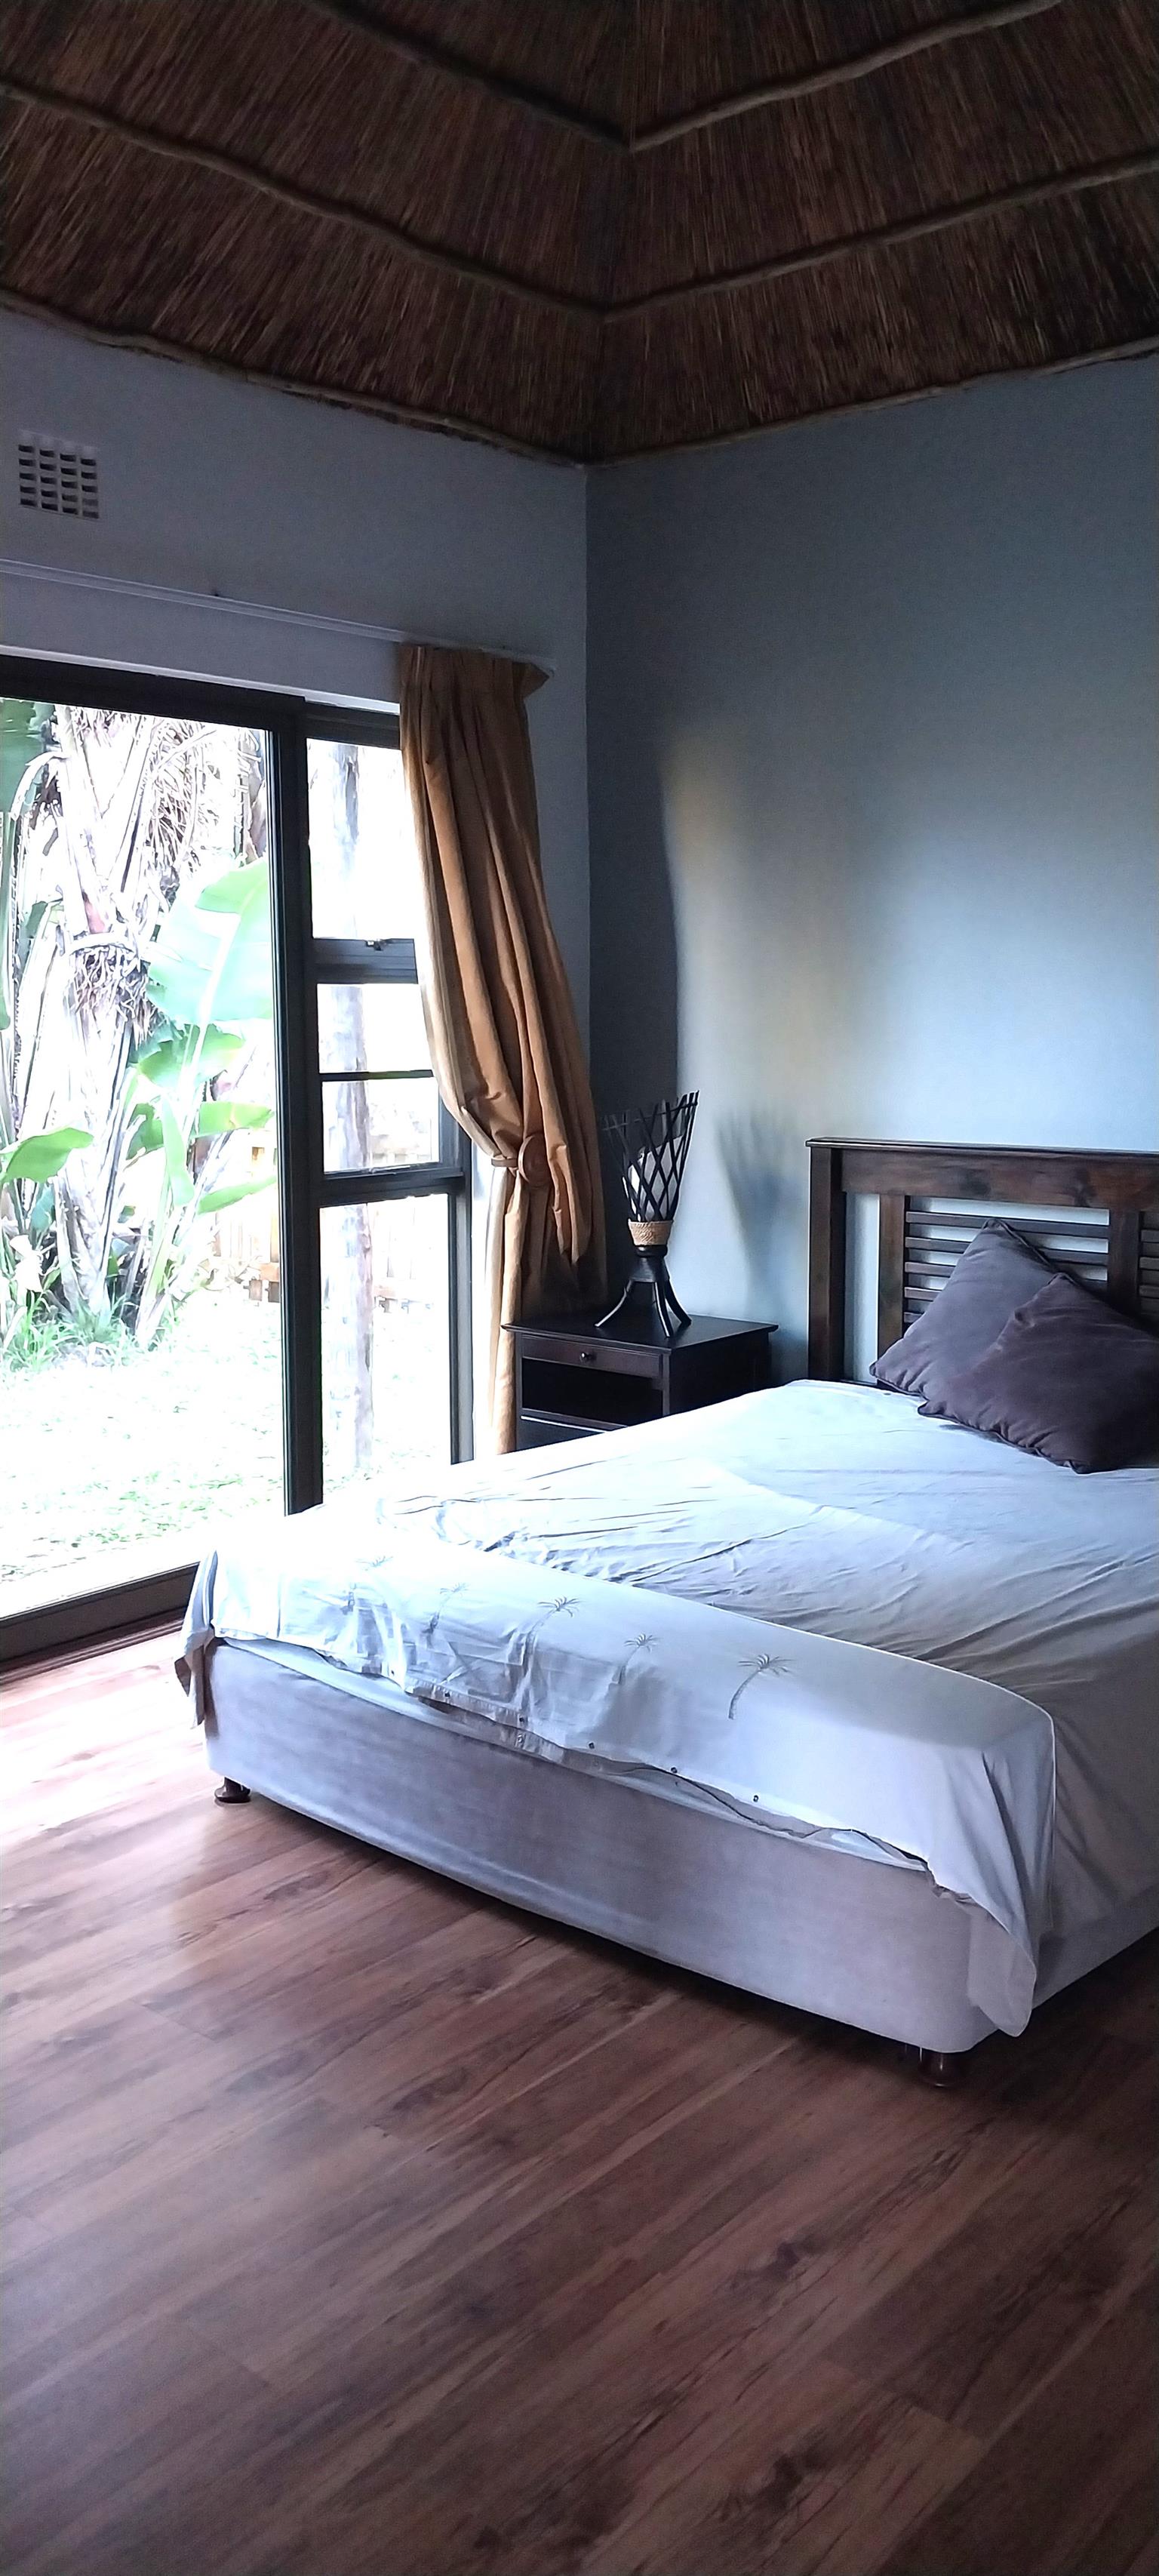 Immaculate one bedroom cottage to rent in Paradise.